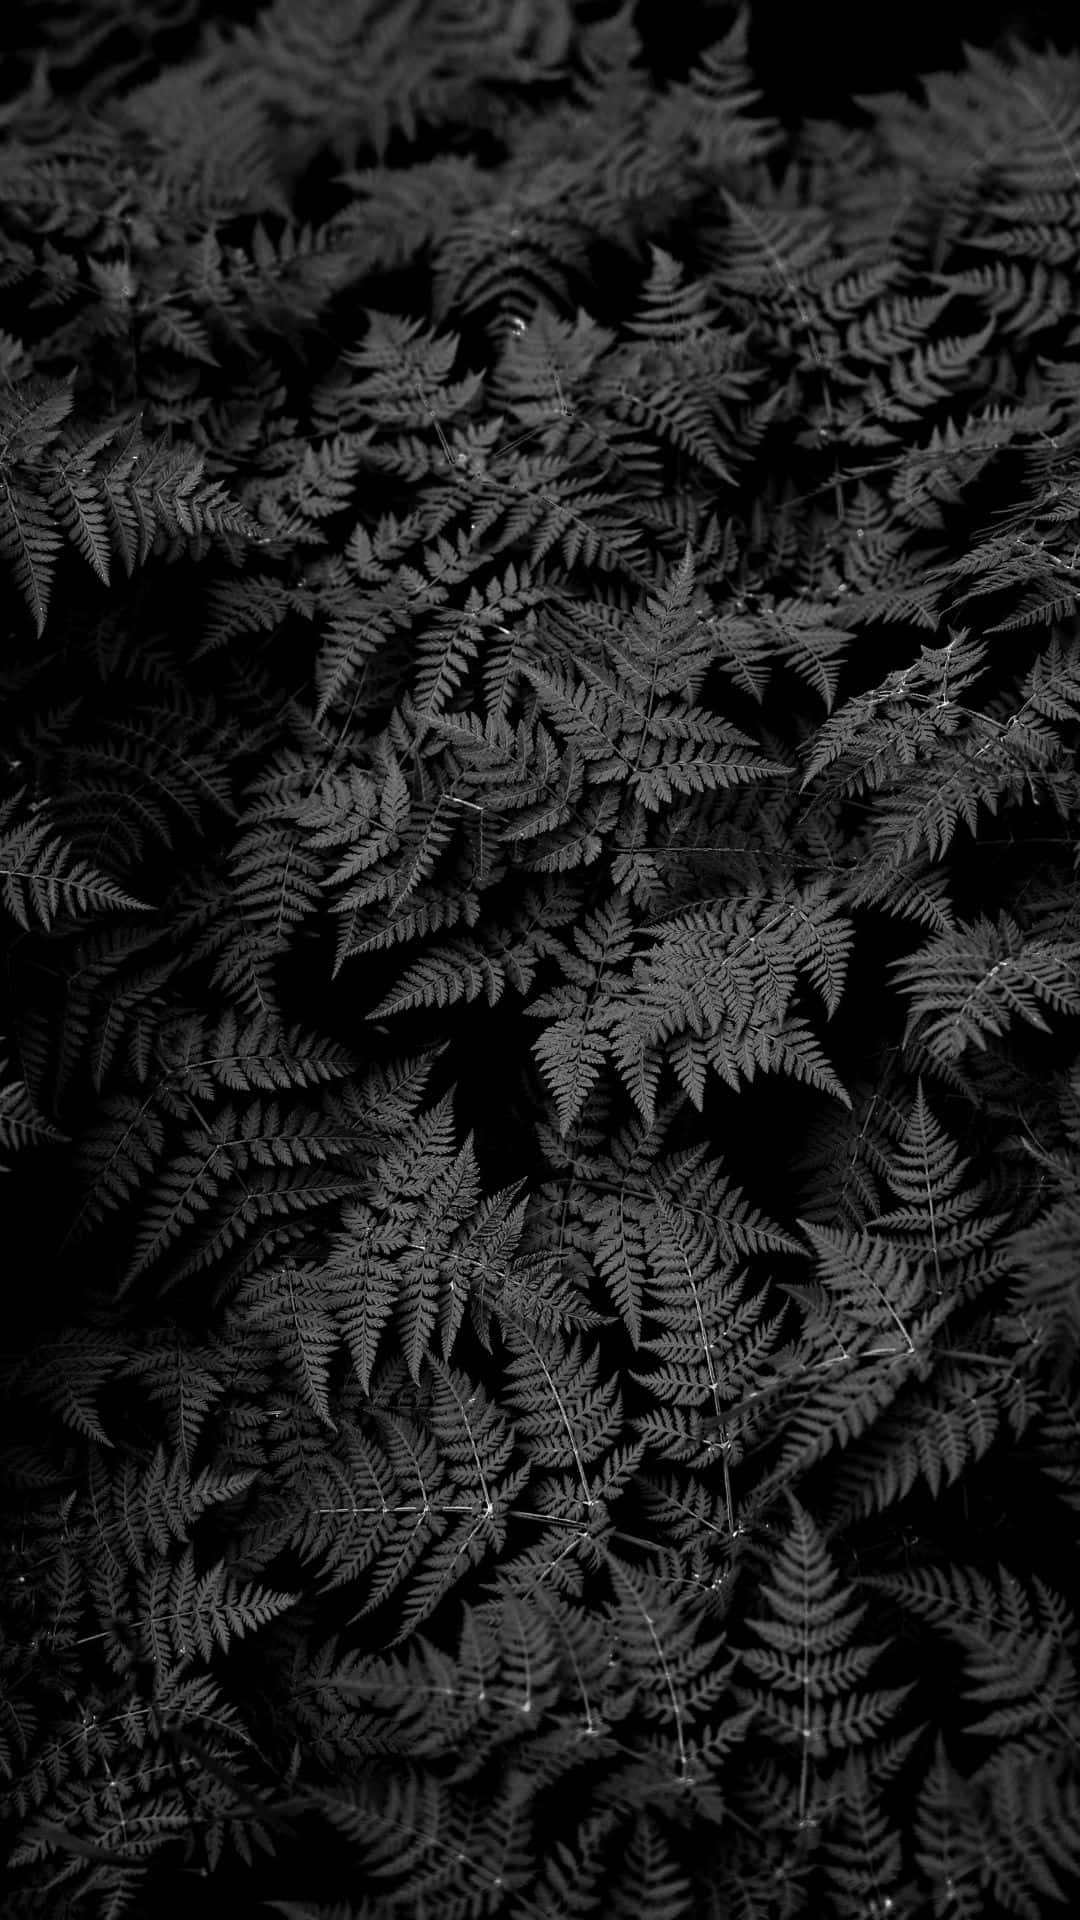 Ferns In Black And White On A Black Background